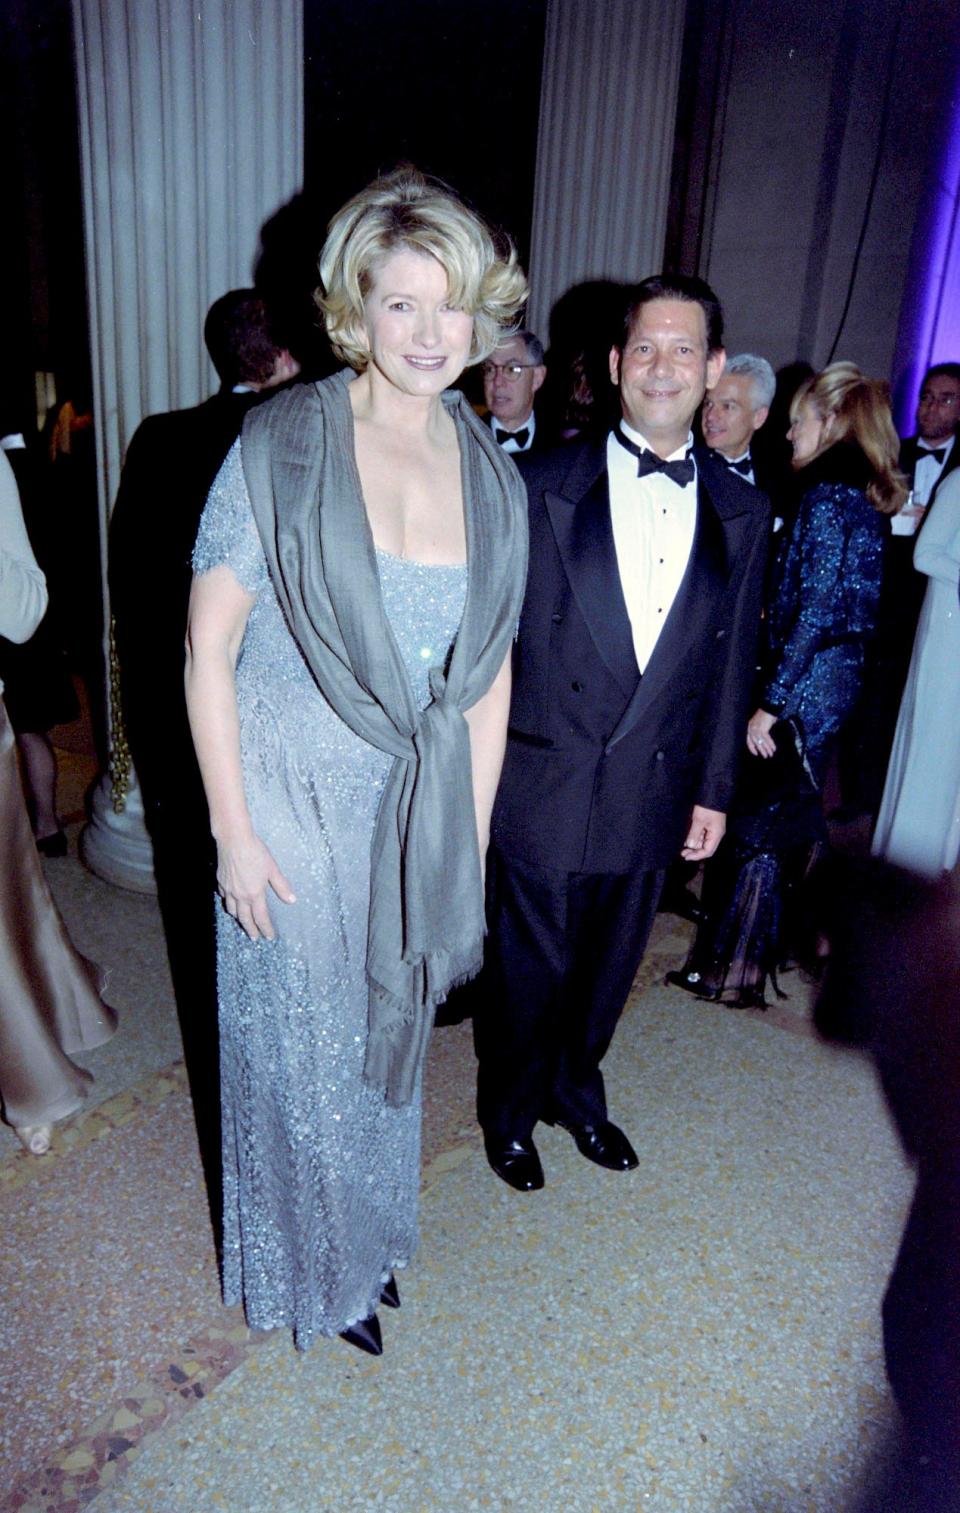 Martha Stewart, wearing a sparkly, short-sleeved blue gown, smiles at the Met Gala, surrounded by guests.